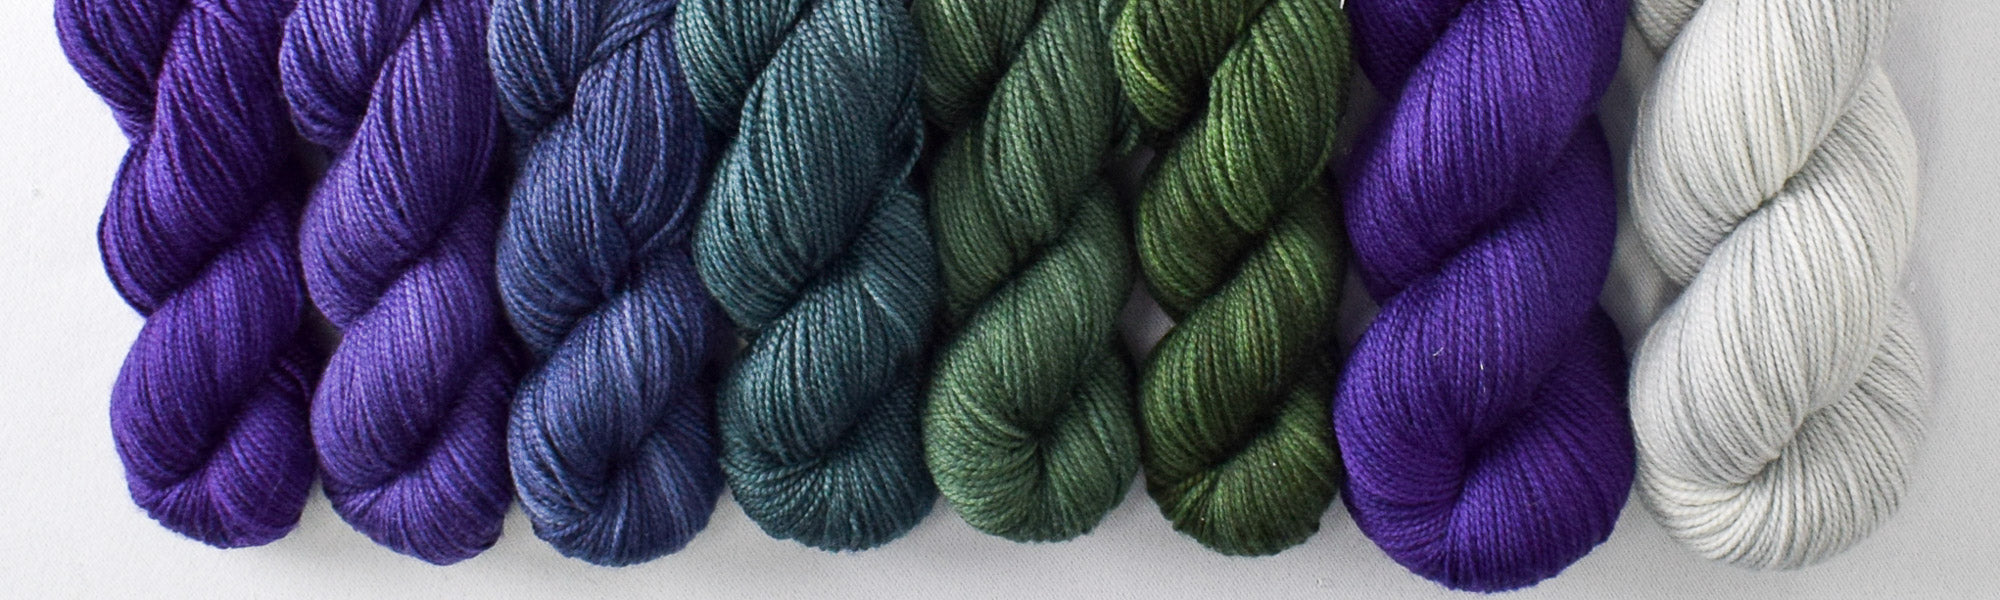 Ravelry: North Light Fibers Forever Lace